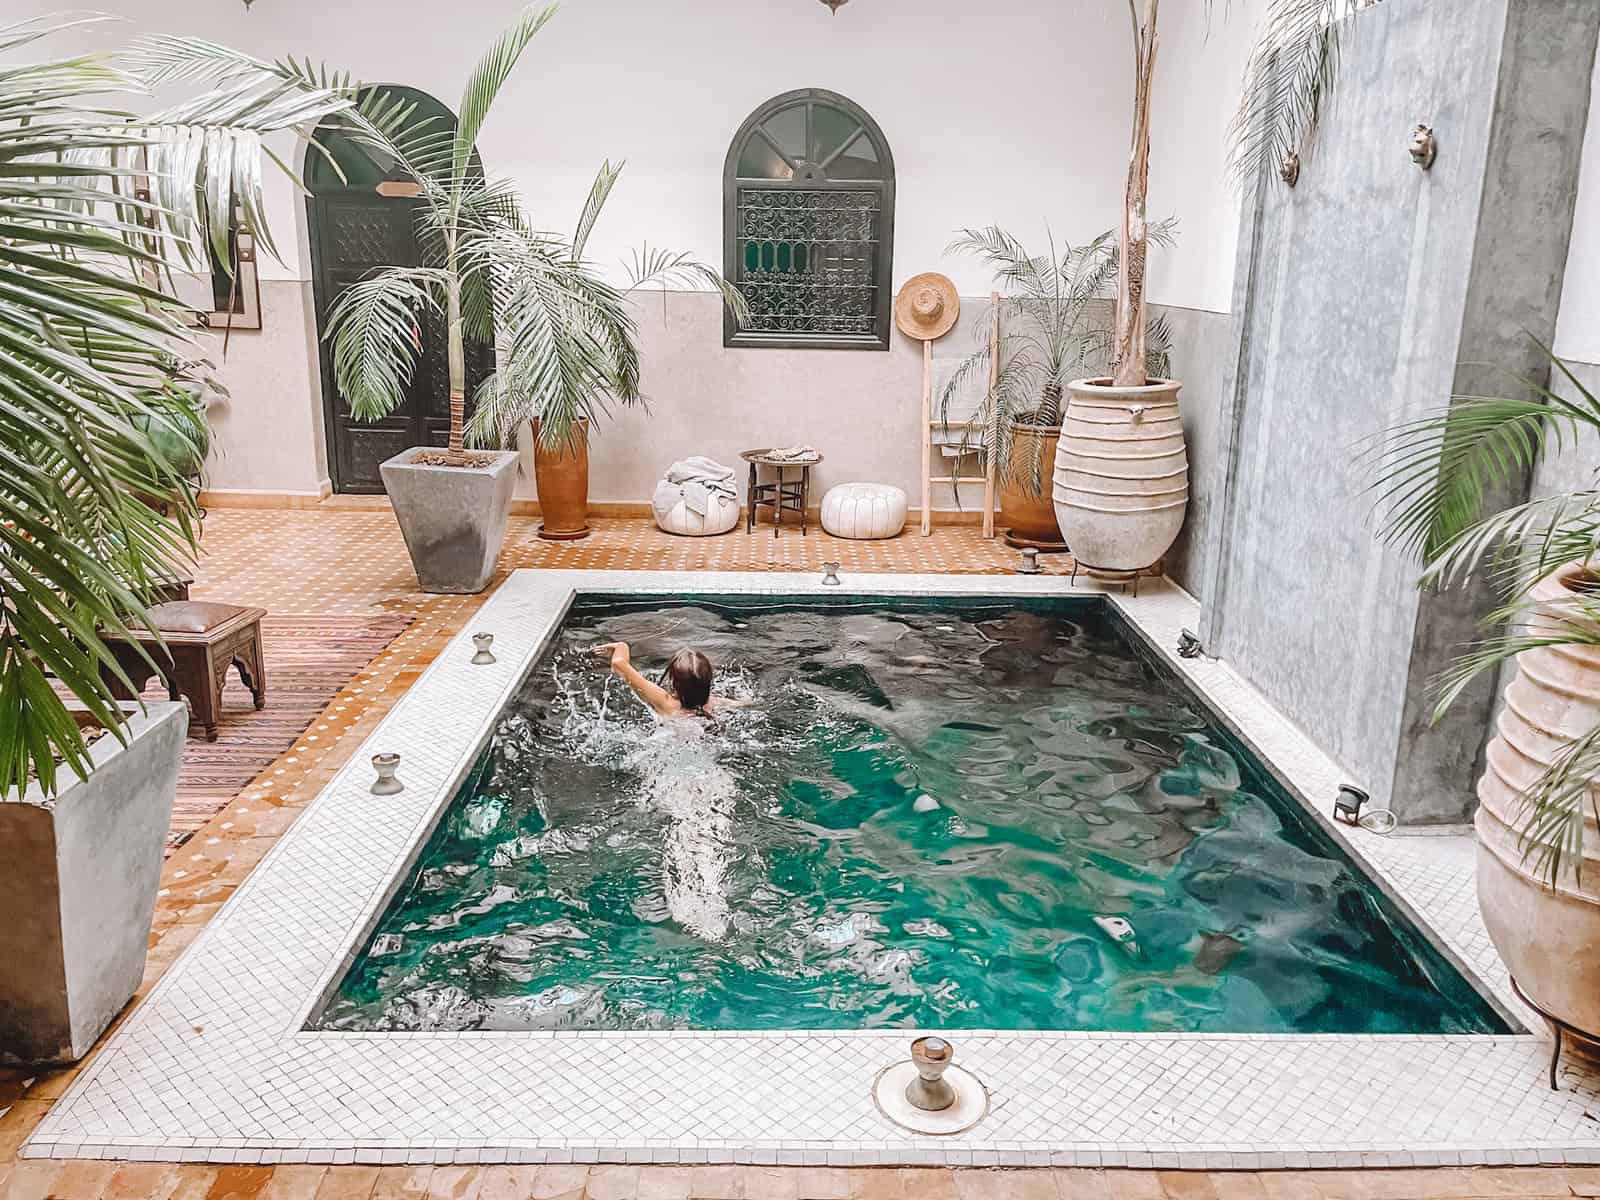 Girl swimming in a small indoor pool in a riad in Morocco with plants surrounding her